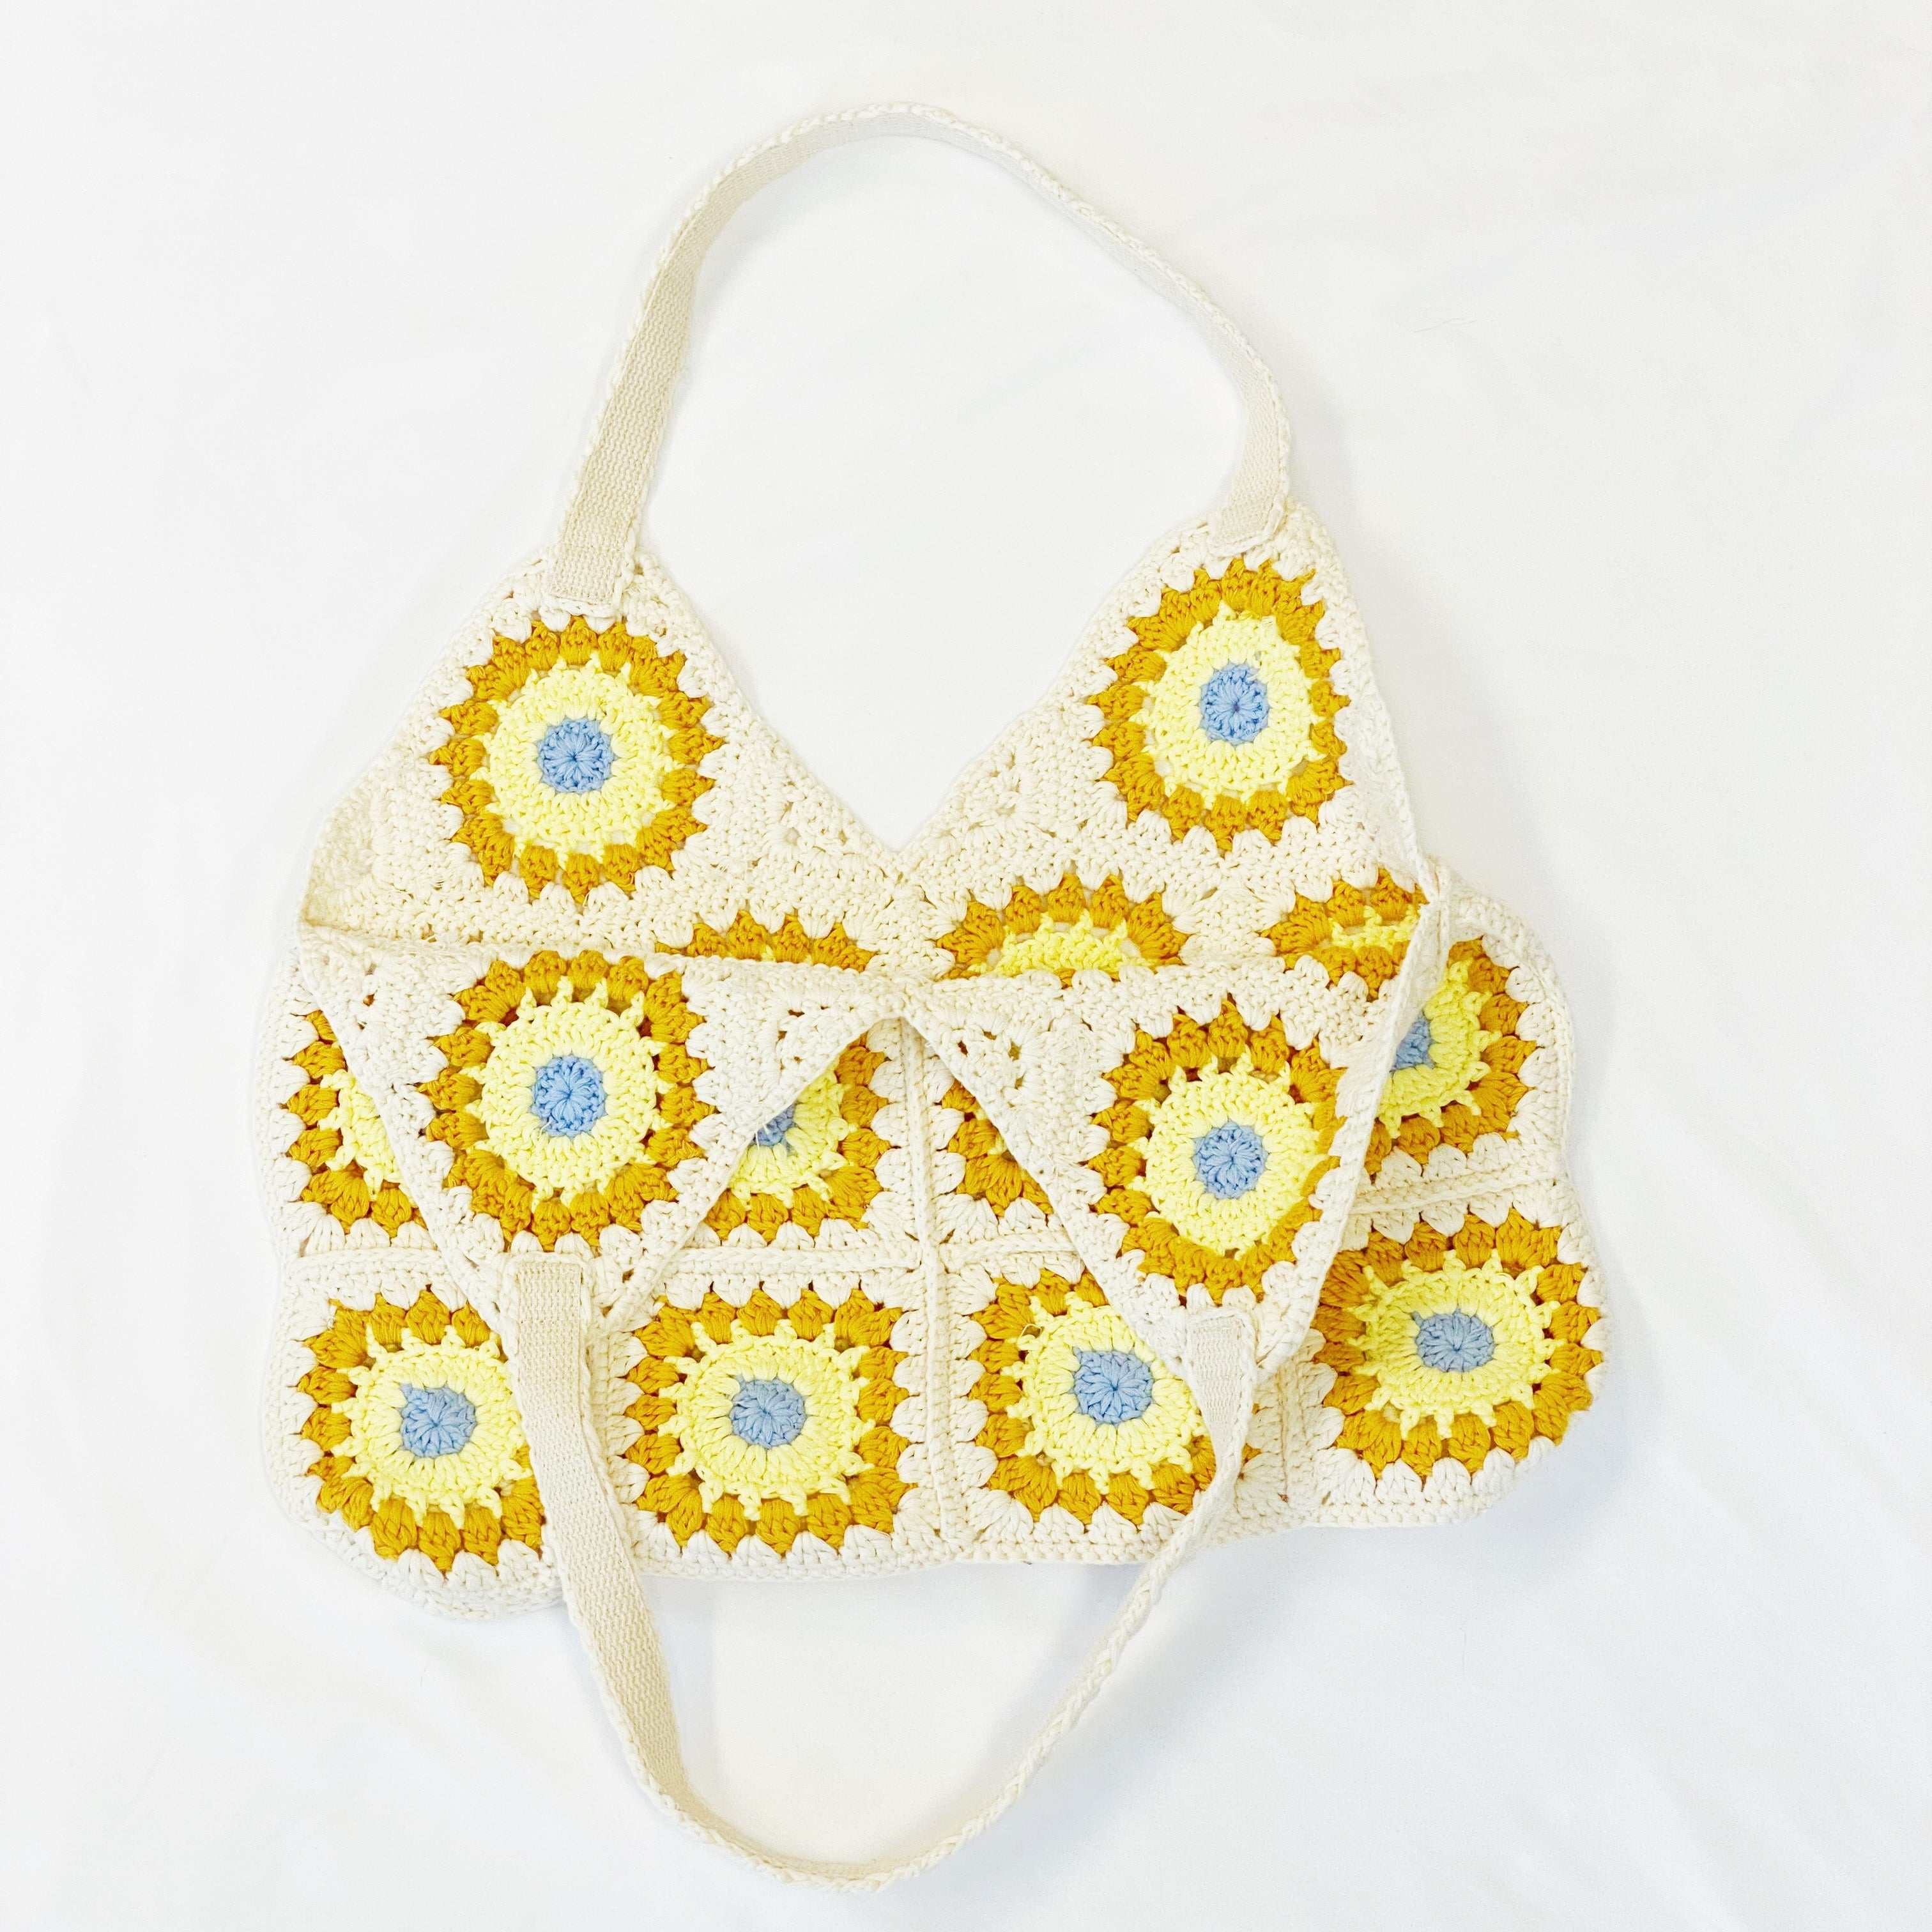 Vintage Hand Knitted Crochet Tote by Ellisonyoung.com